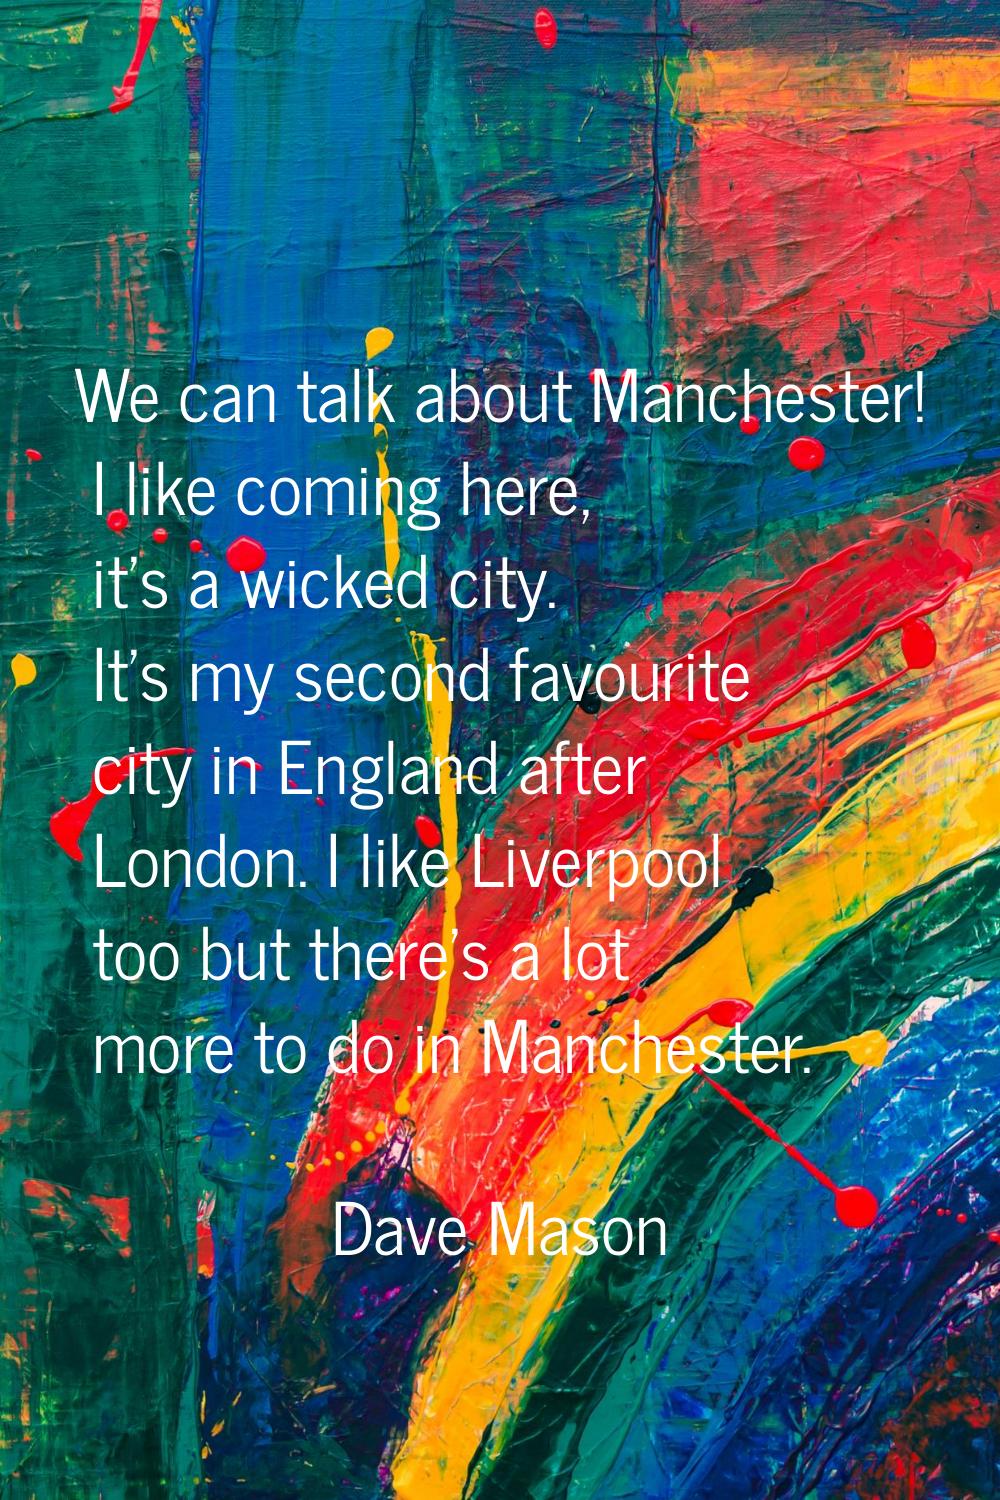 We can talk about Manchester! I like coming here, it's a wicked city. It's my second favourite city